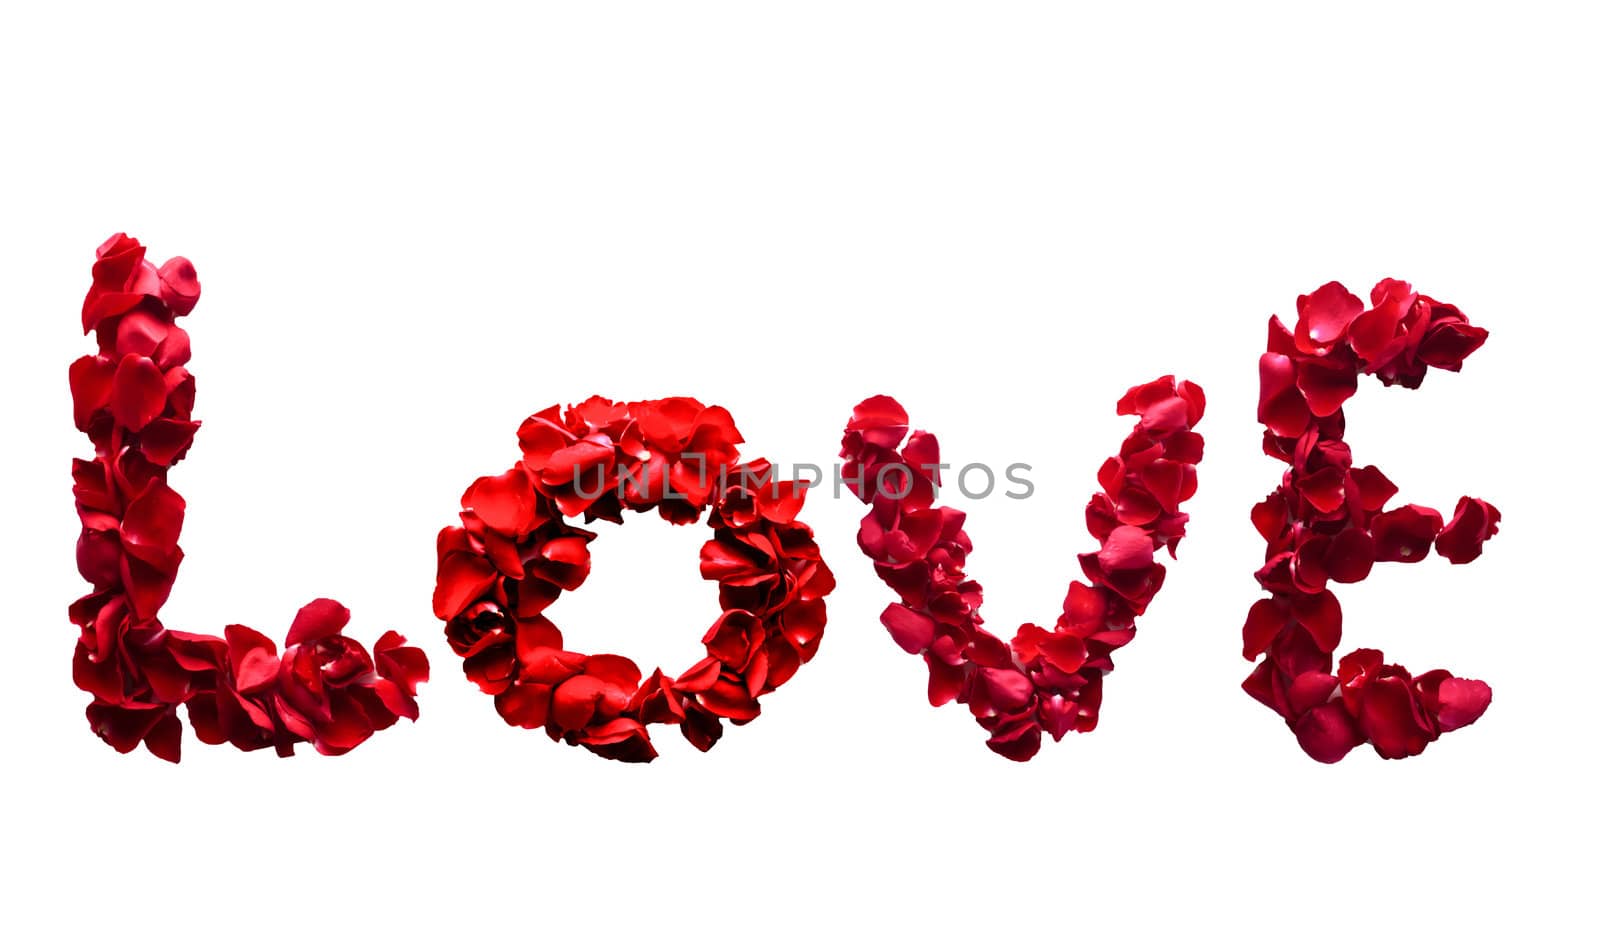 Alphabet letter LovE made from red petals rose isolated on a whi by kurapy